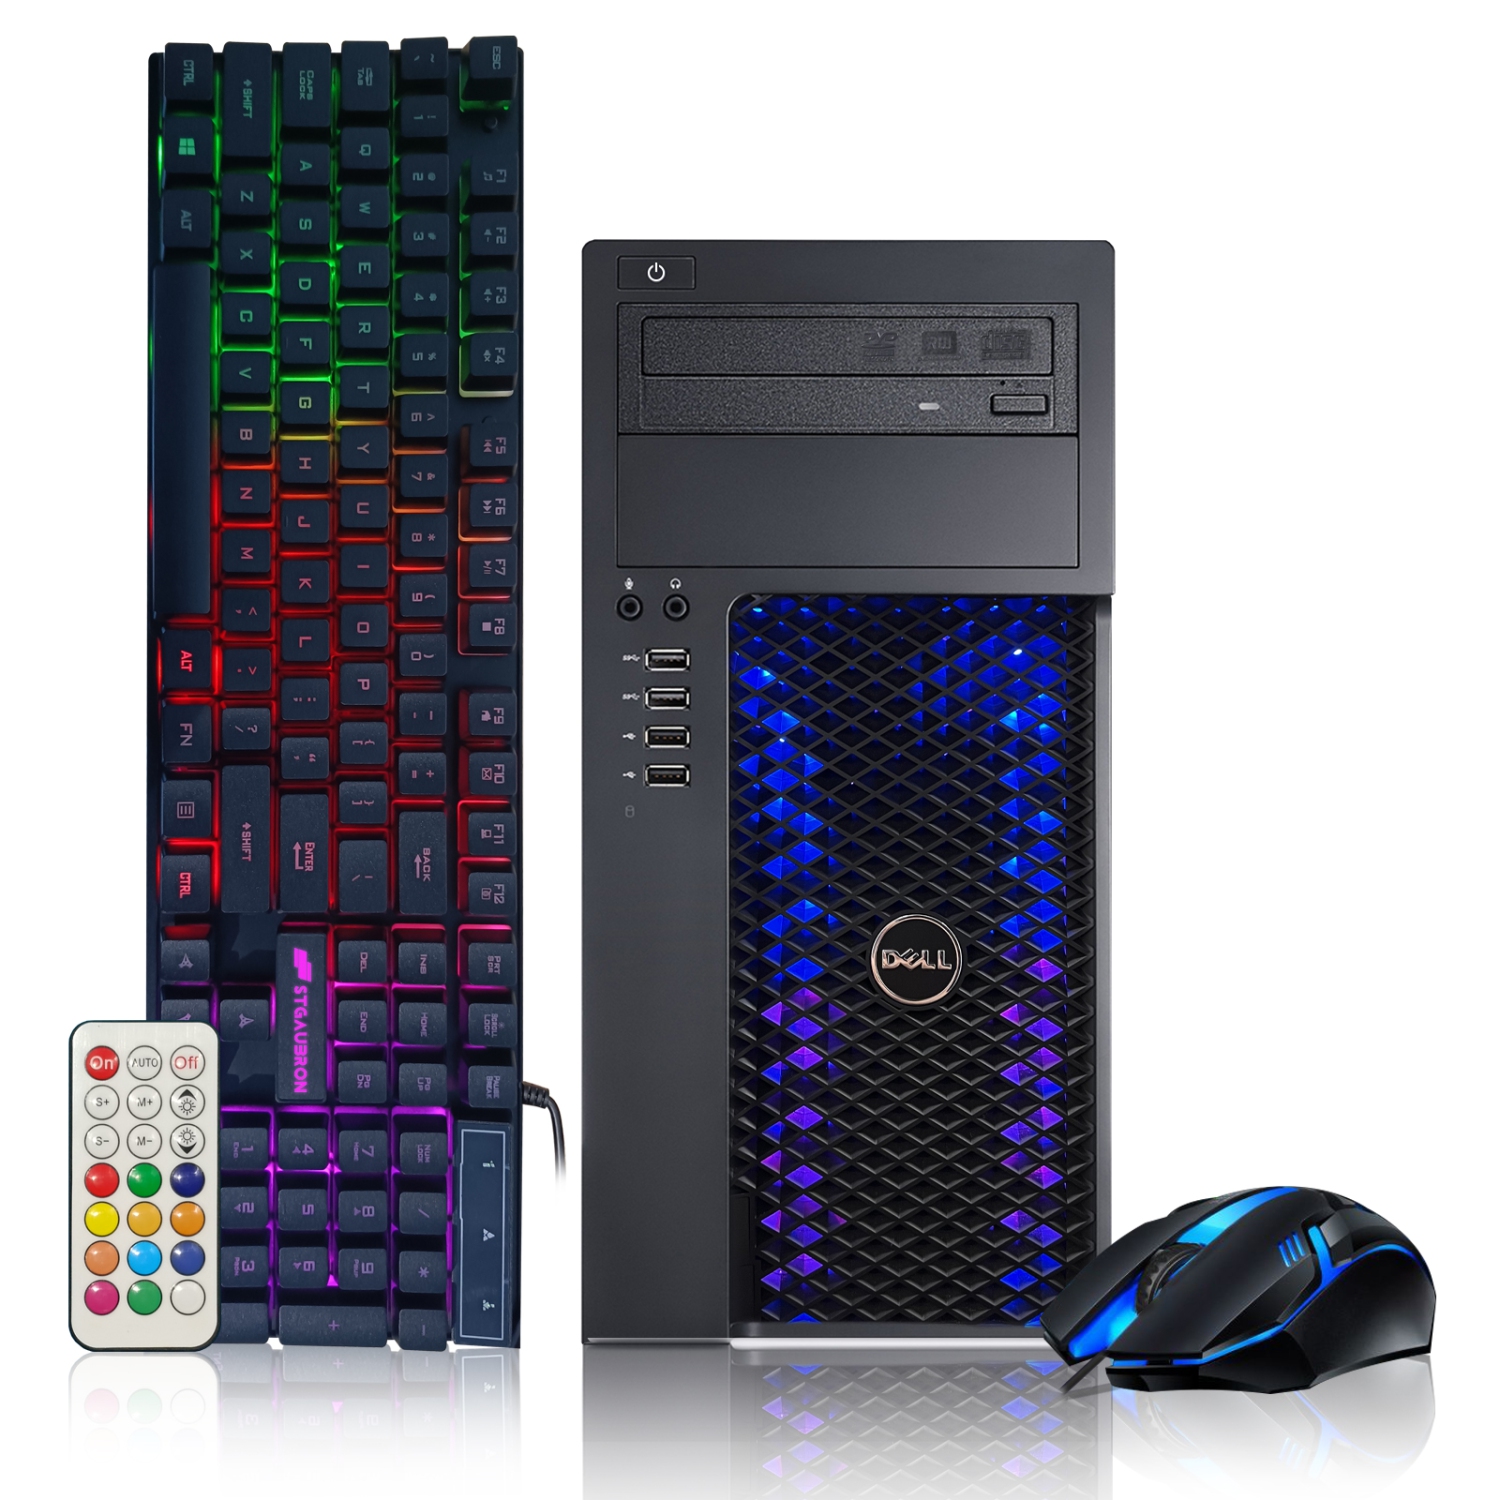 Dell Gaming PC Desktop computer - Intel Quad I5 up to 3.6GHz, GeForce RTX 2060 6G, 128G SSD + 2TB, 16GB Memory, RGB Keyboard & Mouse, DVD, WiFi & Bluetooth, Win 10 Pro-Refurbished